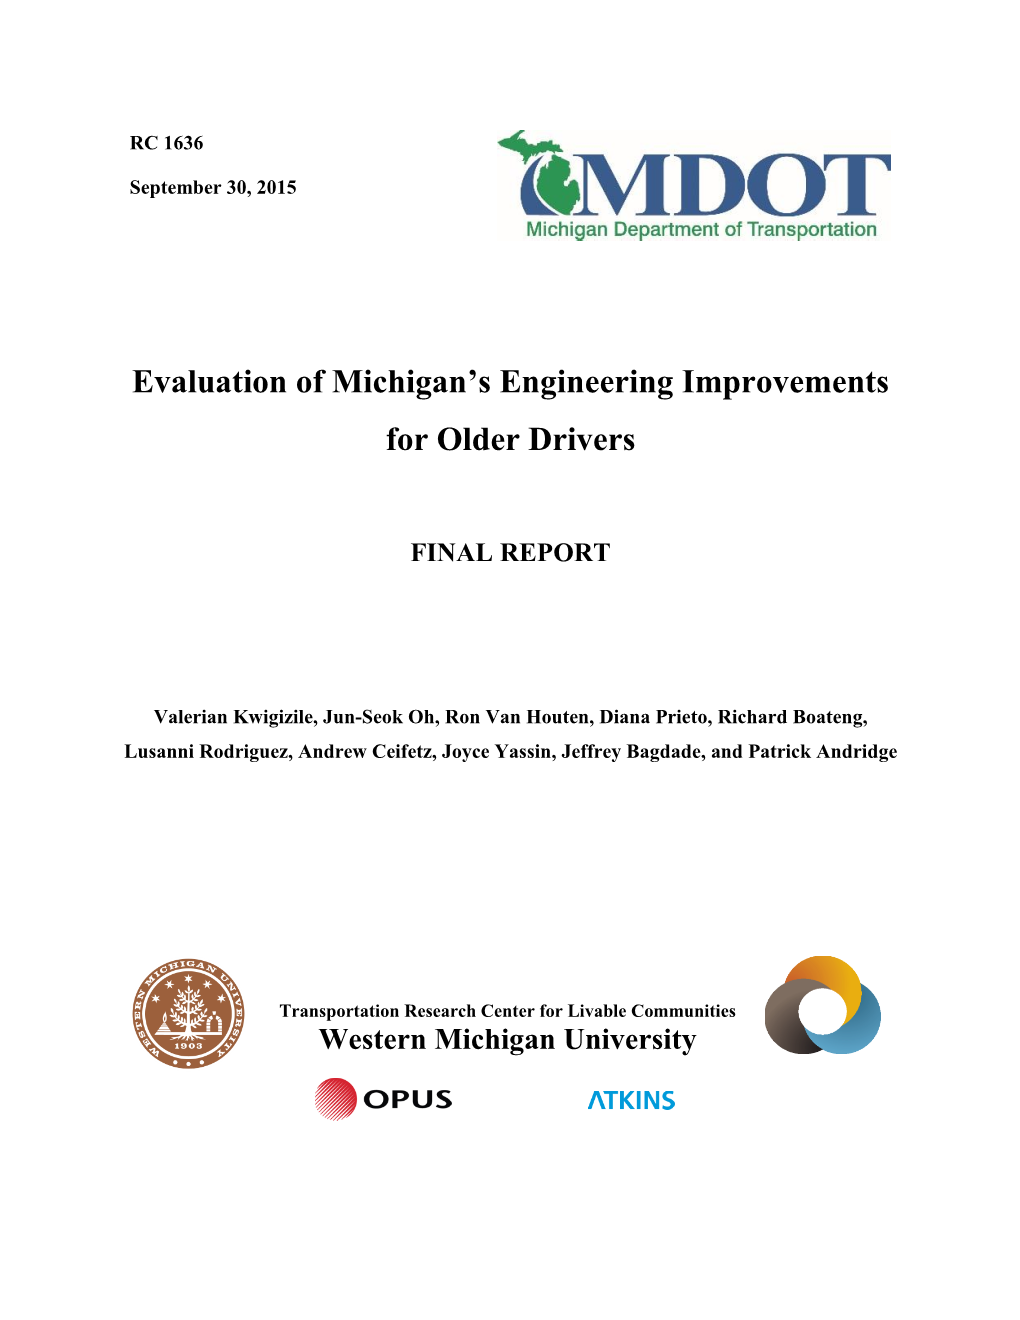 Evaluation of Michigan's Engineering Improvements for Older Drivers